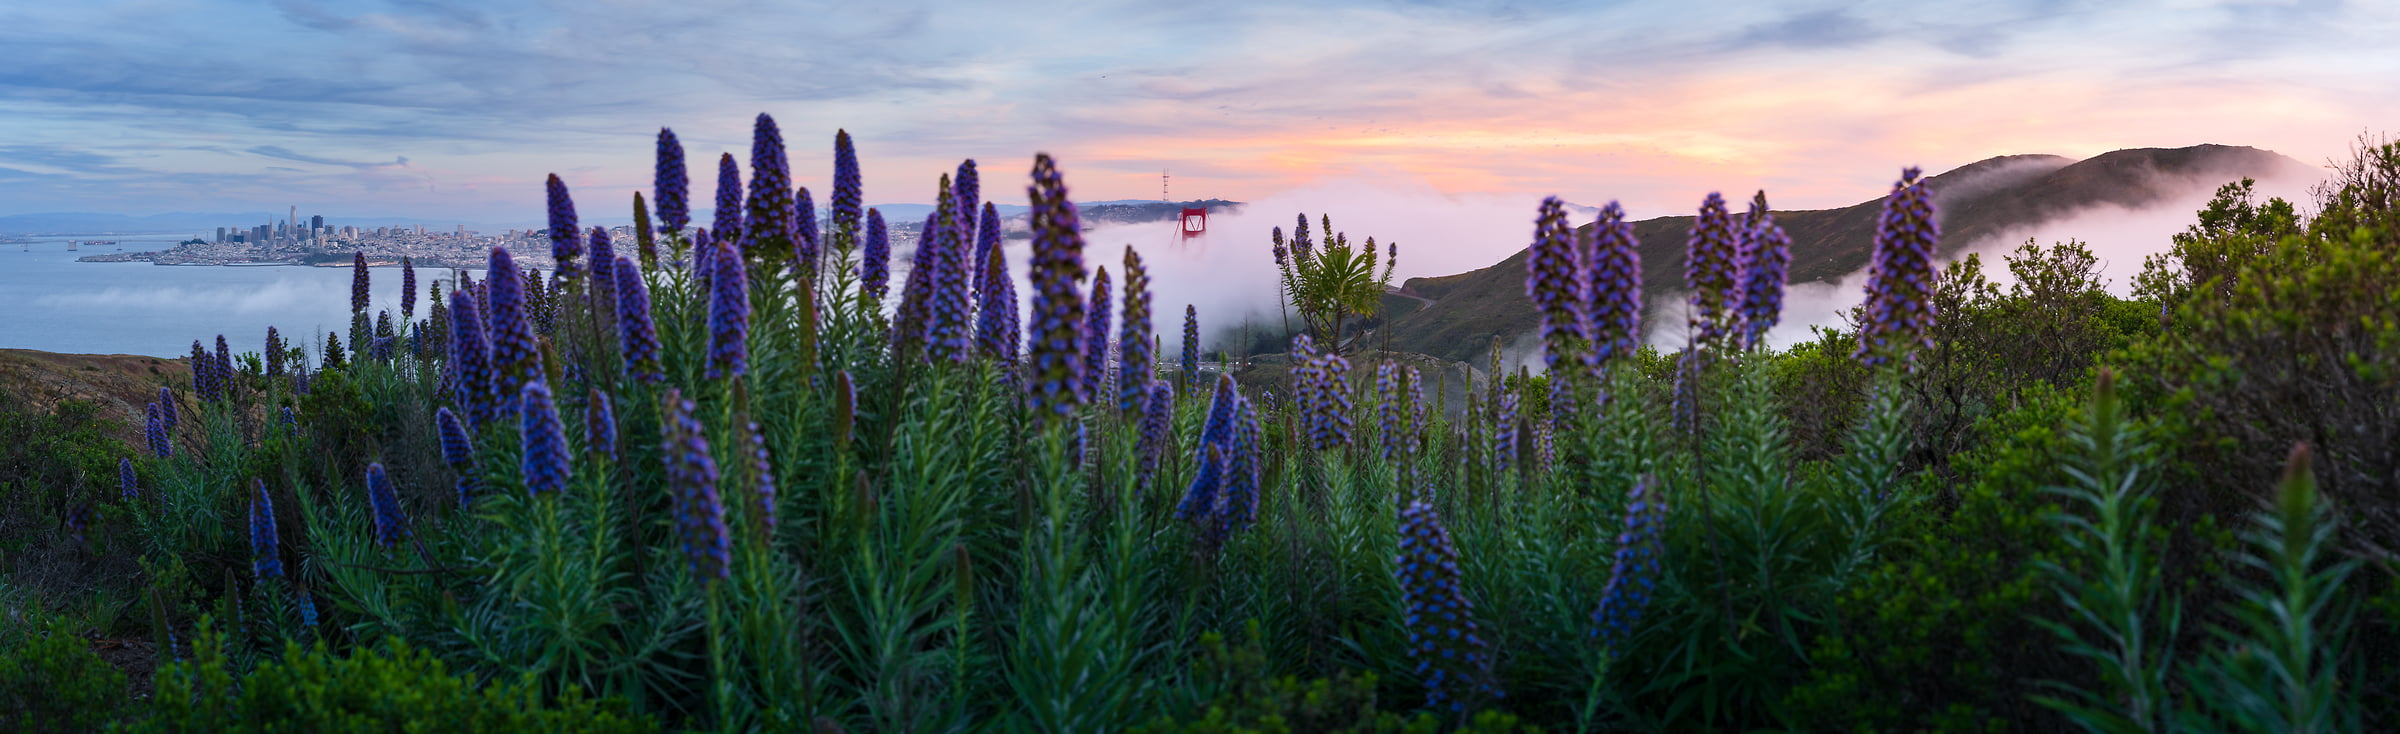 269 megapixels! A very high resolution, large-format VAST photo print of wildflowers with San Francisco and the Golden Gate Bridge in the background; landscape photograph created by Jeff Lewis in Marin Headlands, California